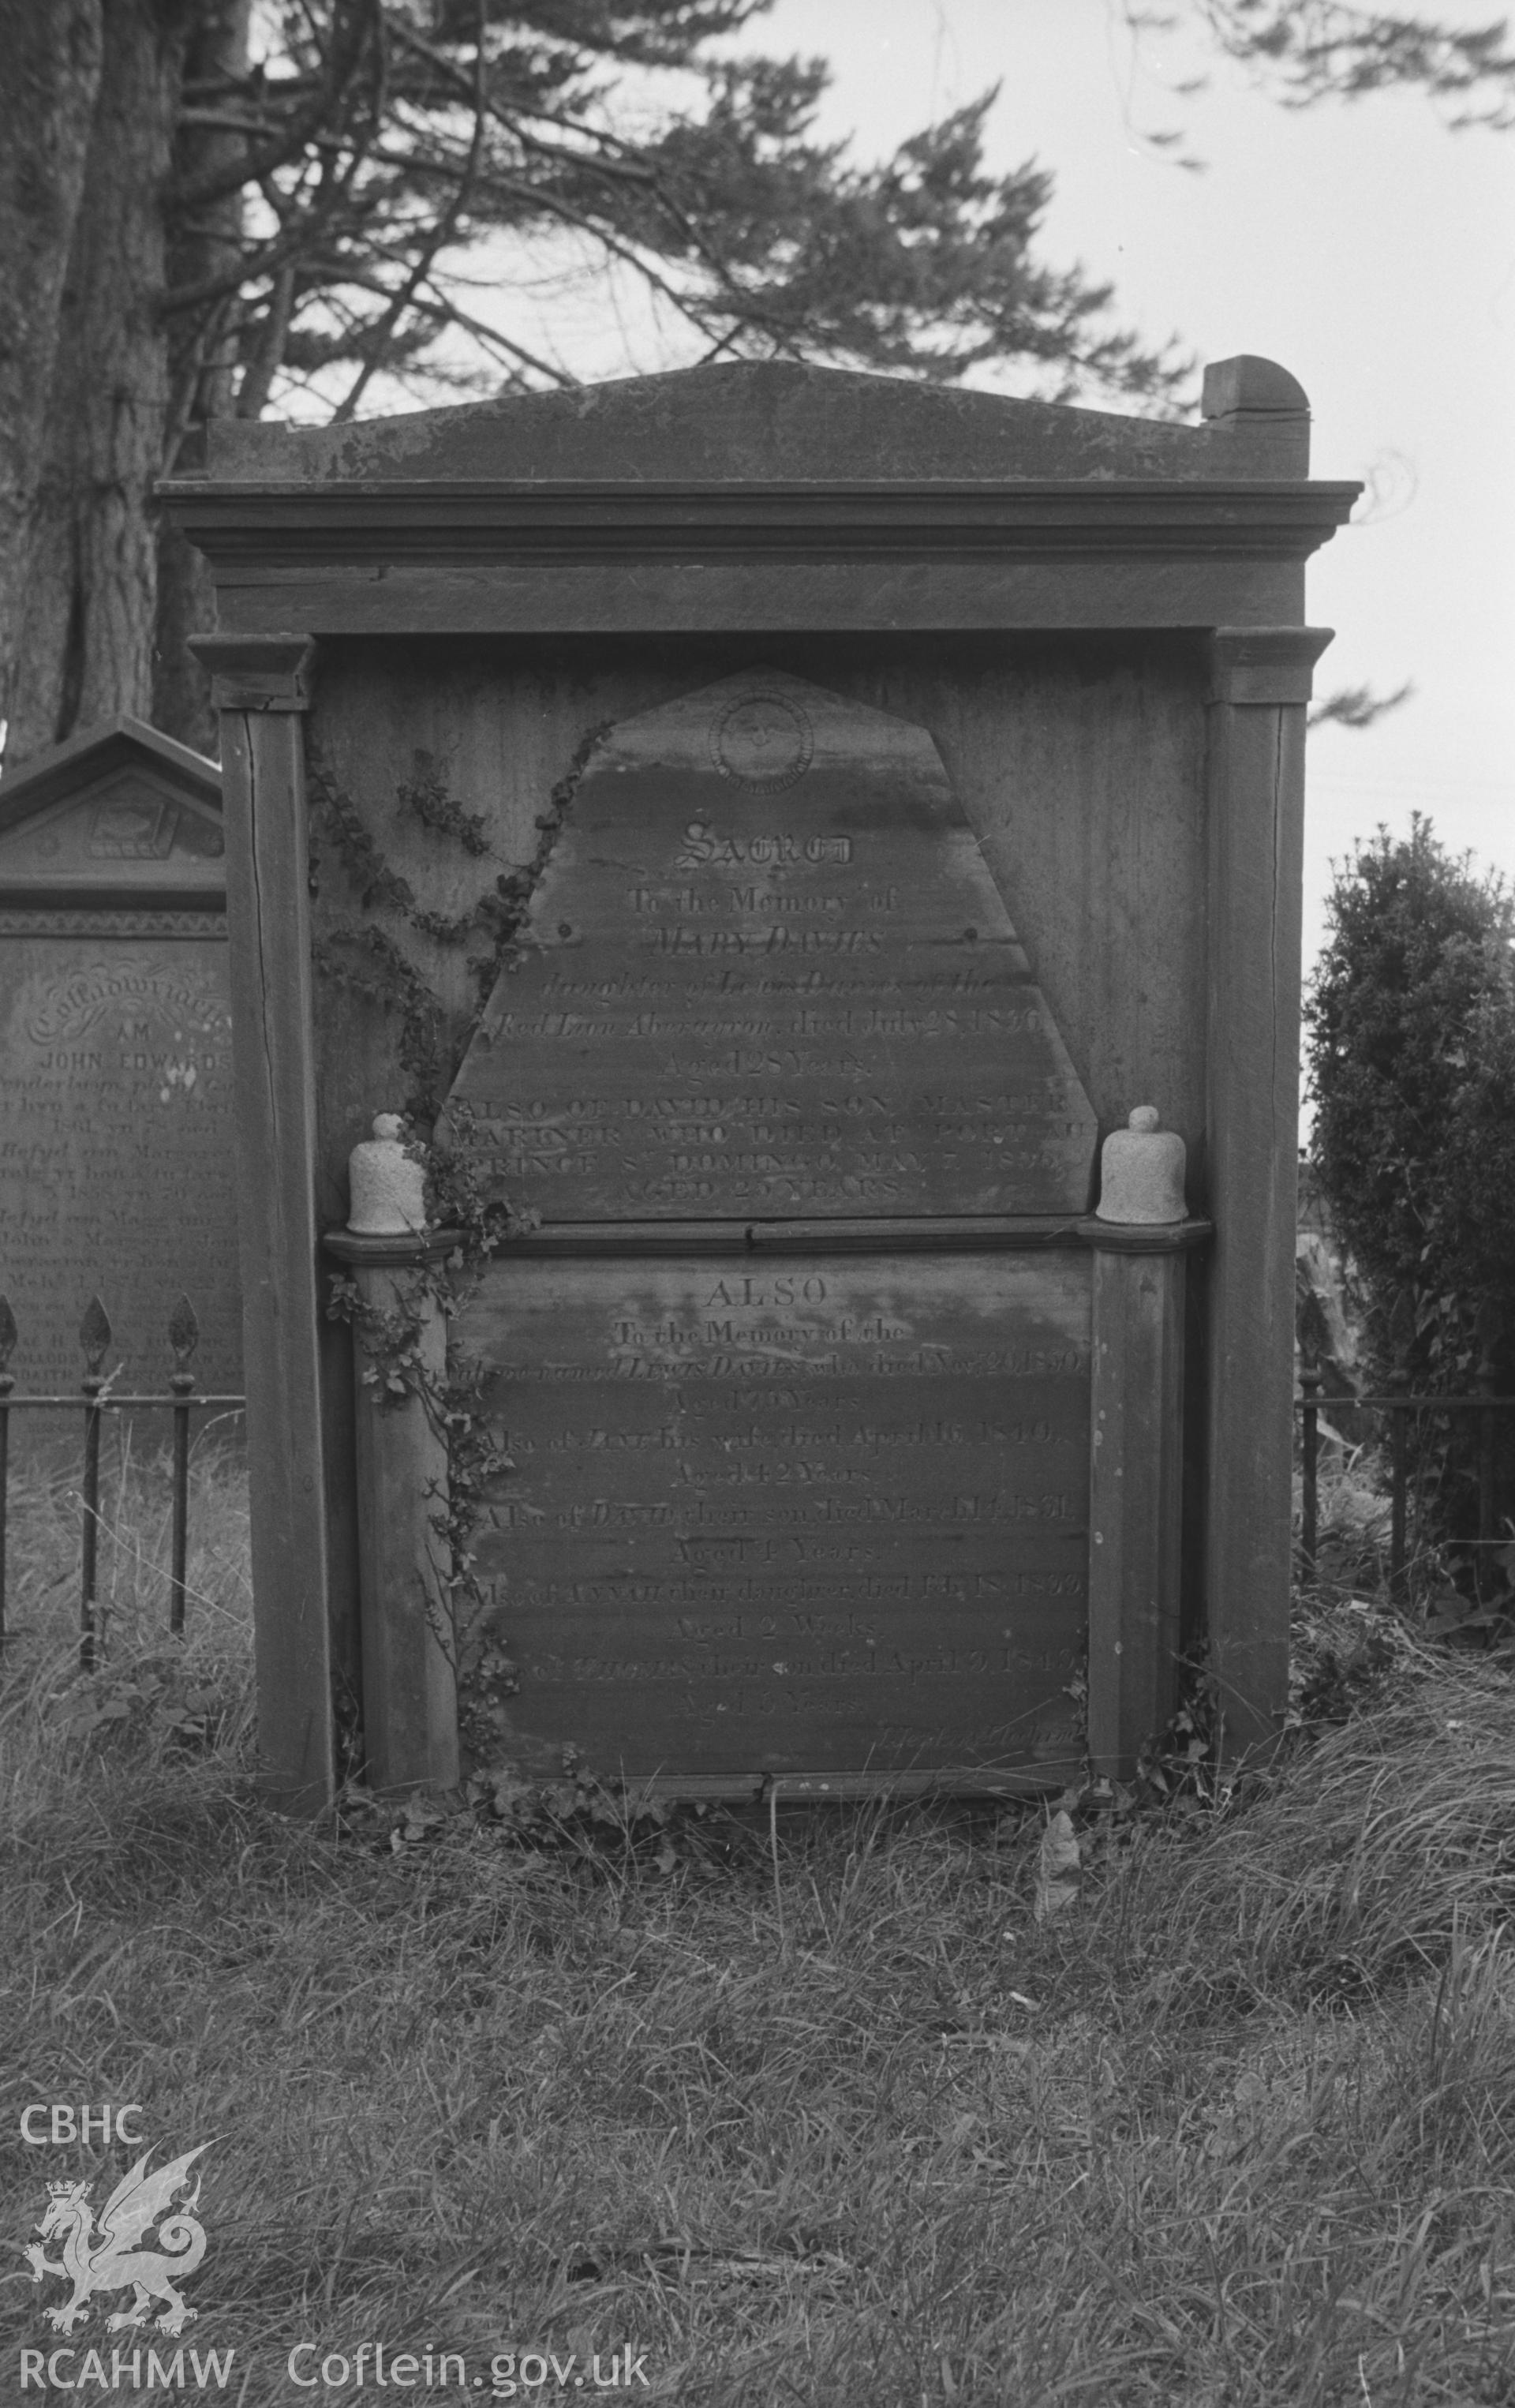 Digital copy of a black and white negative showing gravestones at St. David's Church, Henfynyw, Aberaeron. Photographed by Arthur O. Chater on 5th September 1966 from Grid Reference SN 447 613.